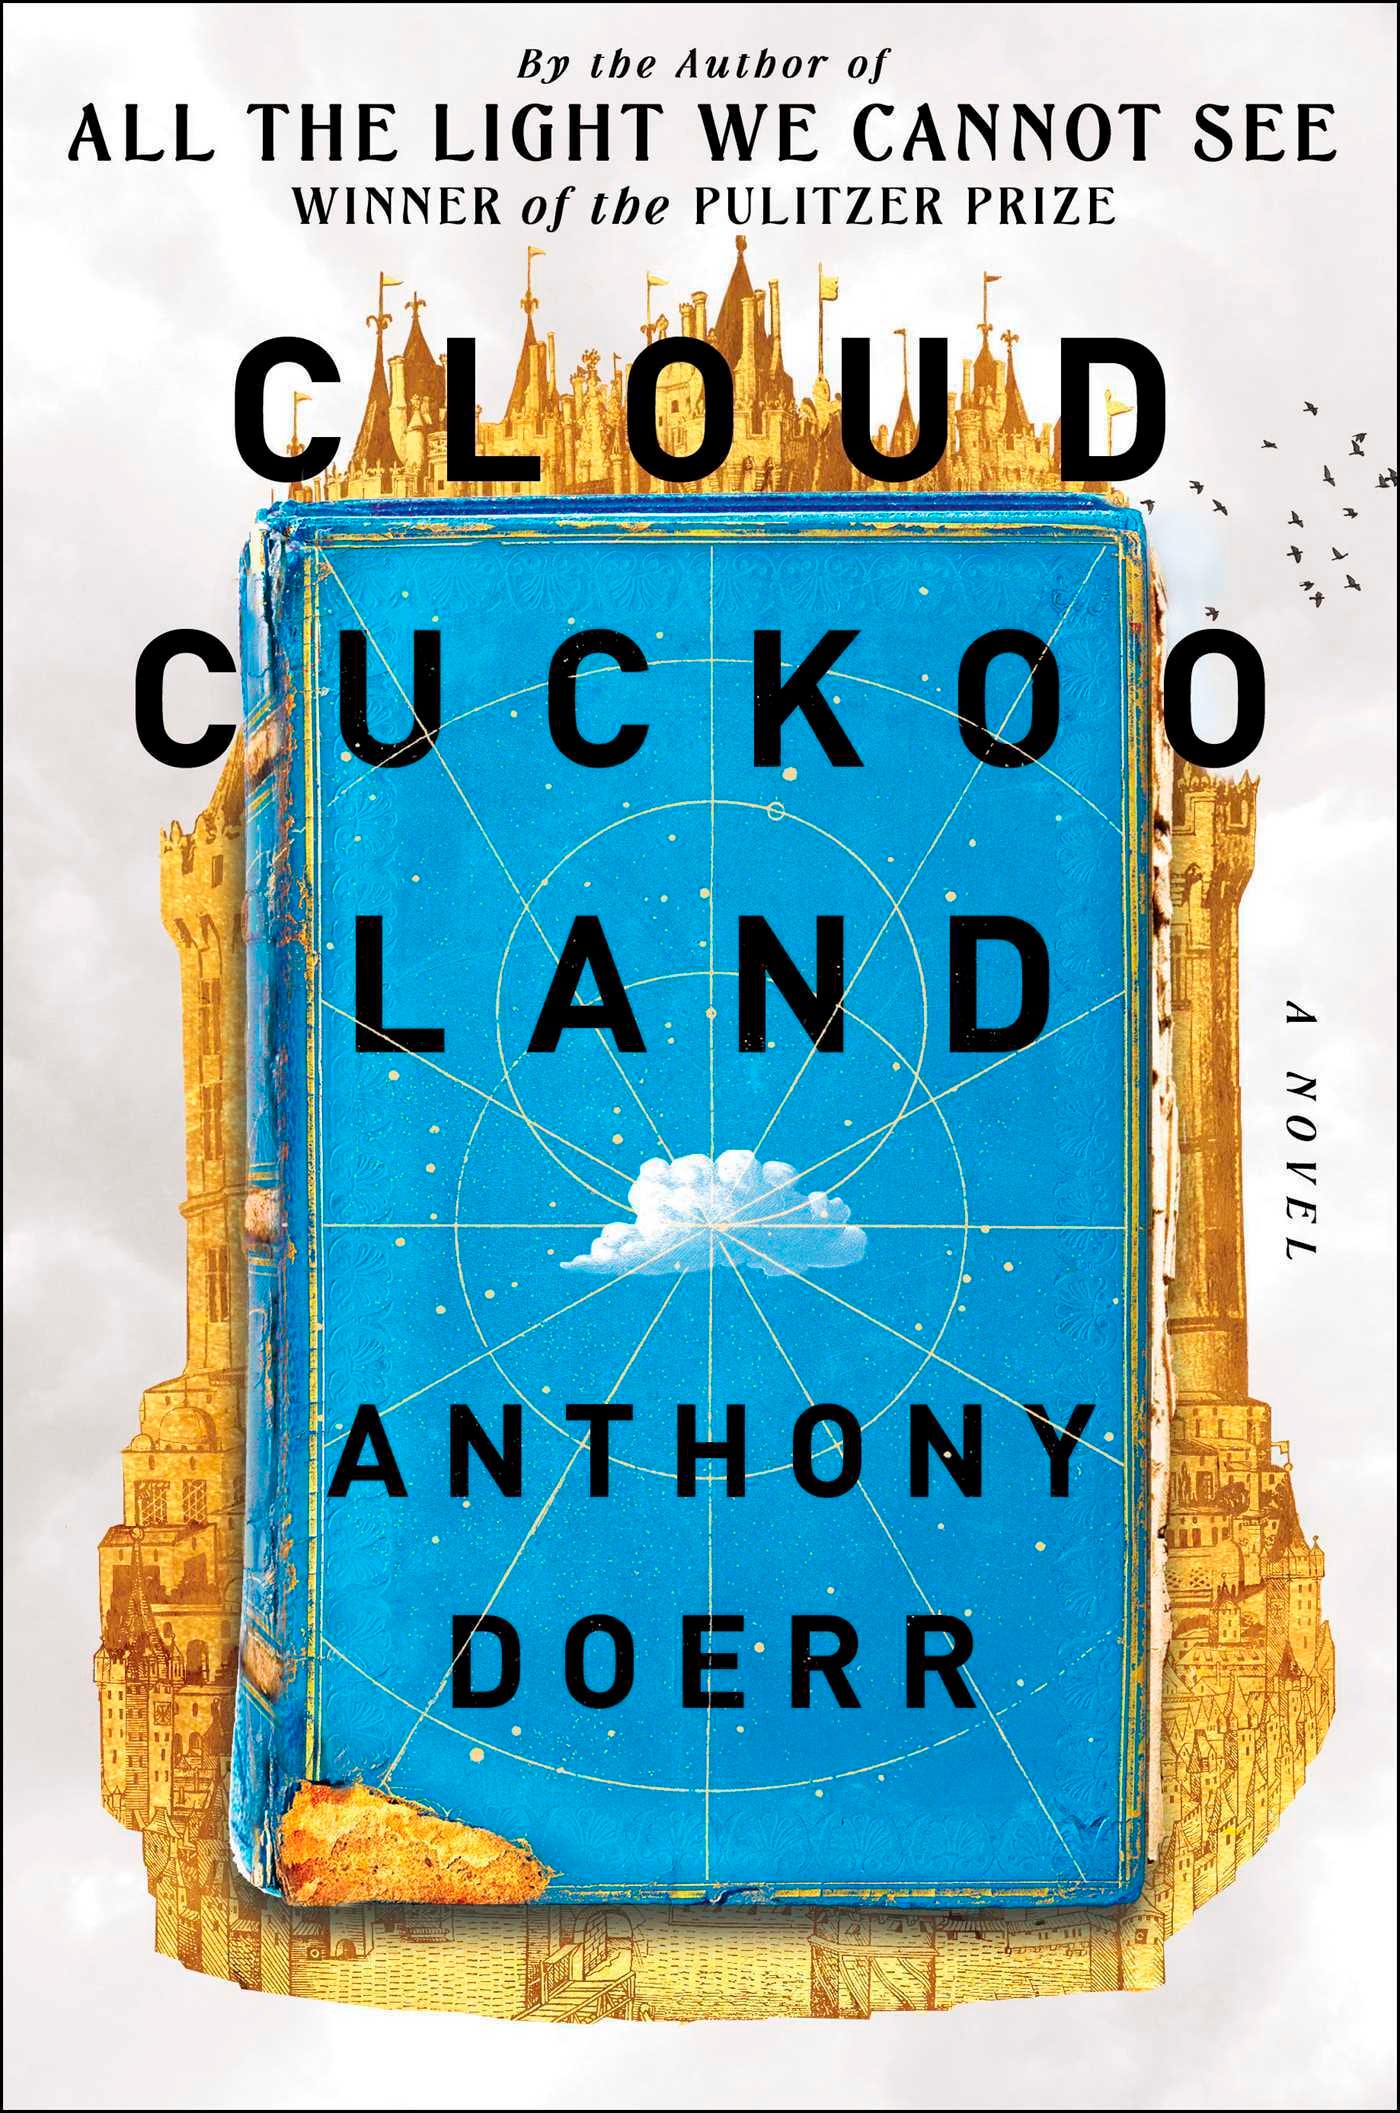 Book Review - Cloud Cuckoo Land